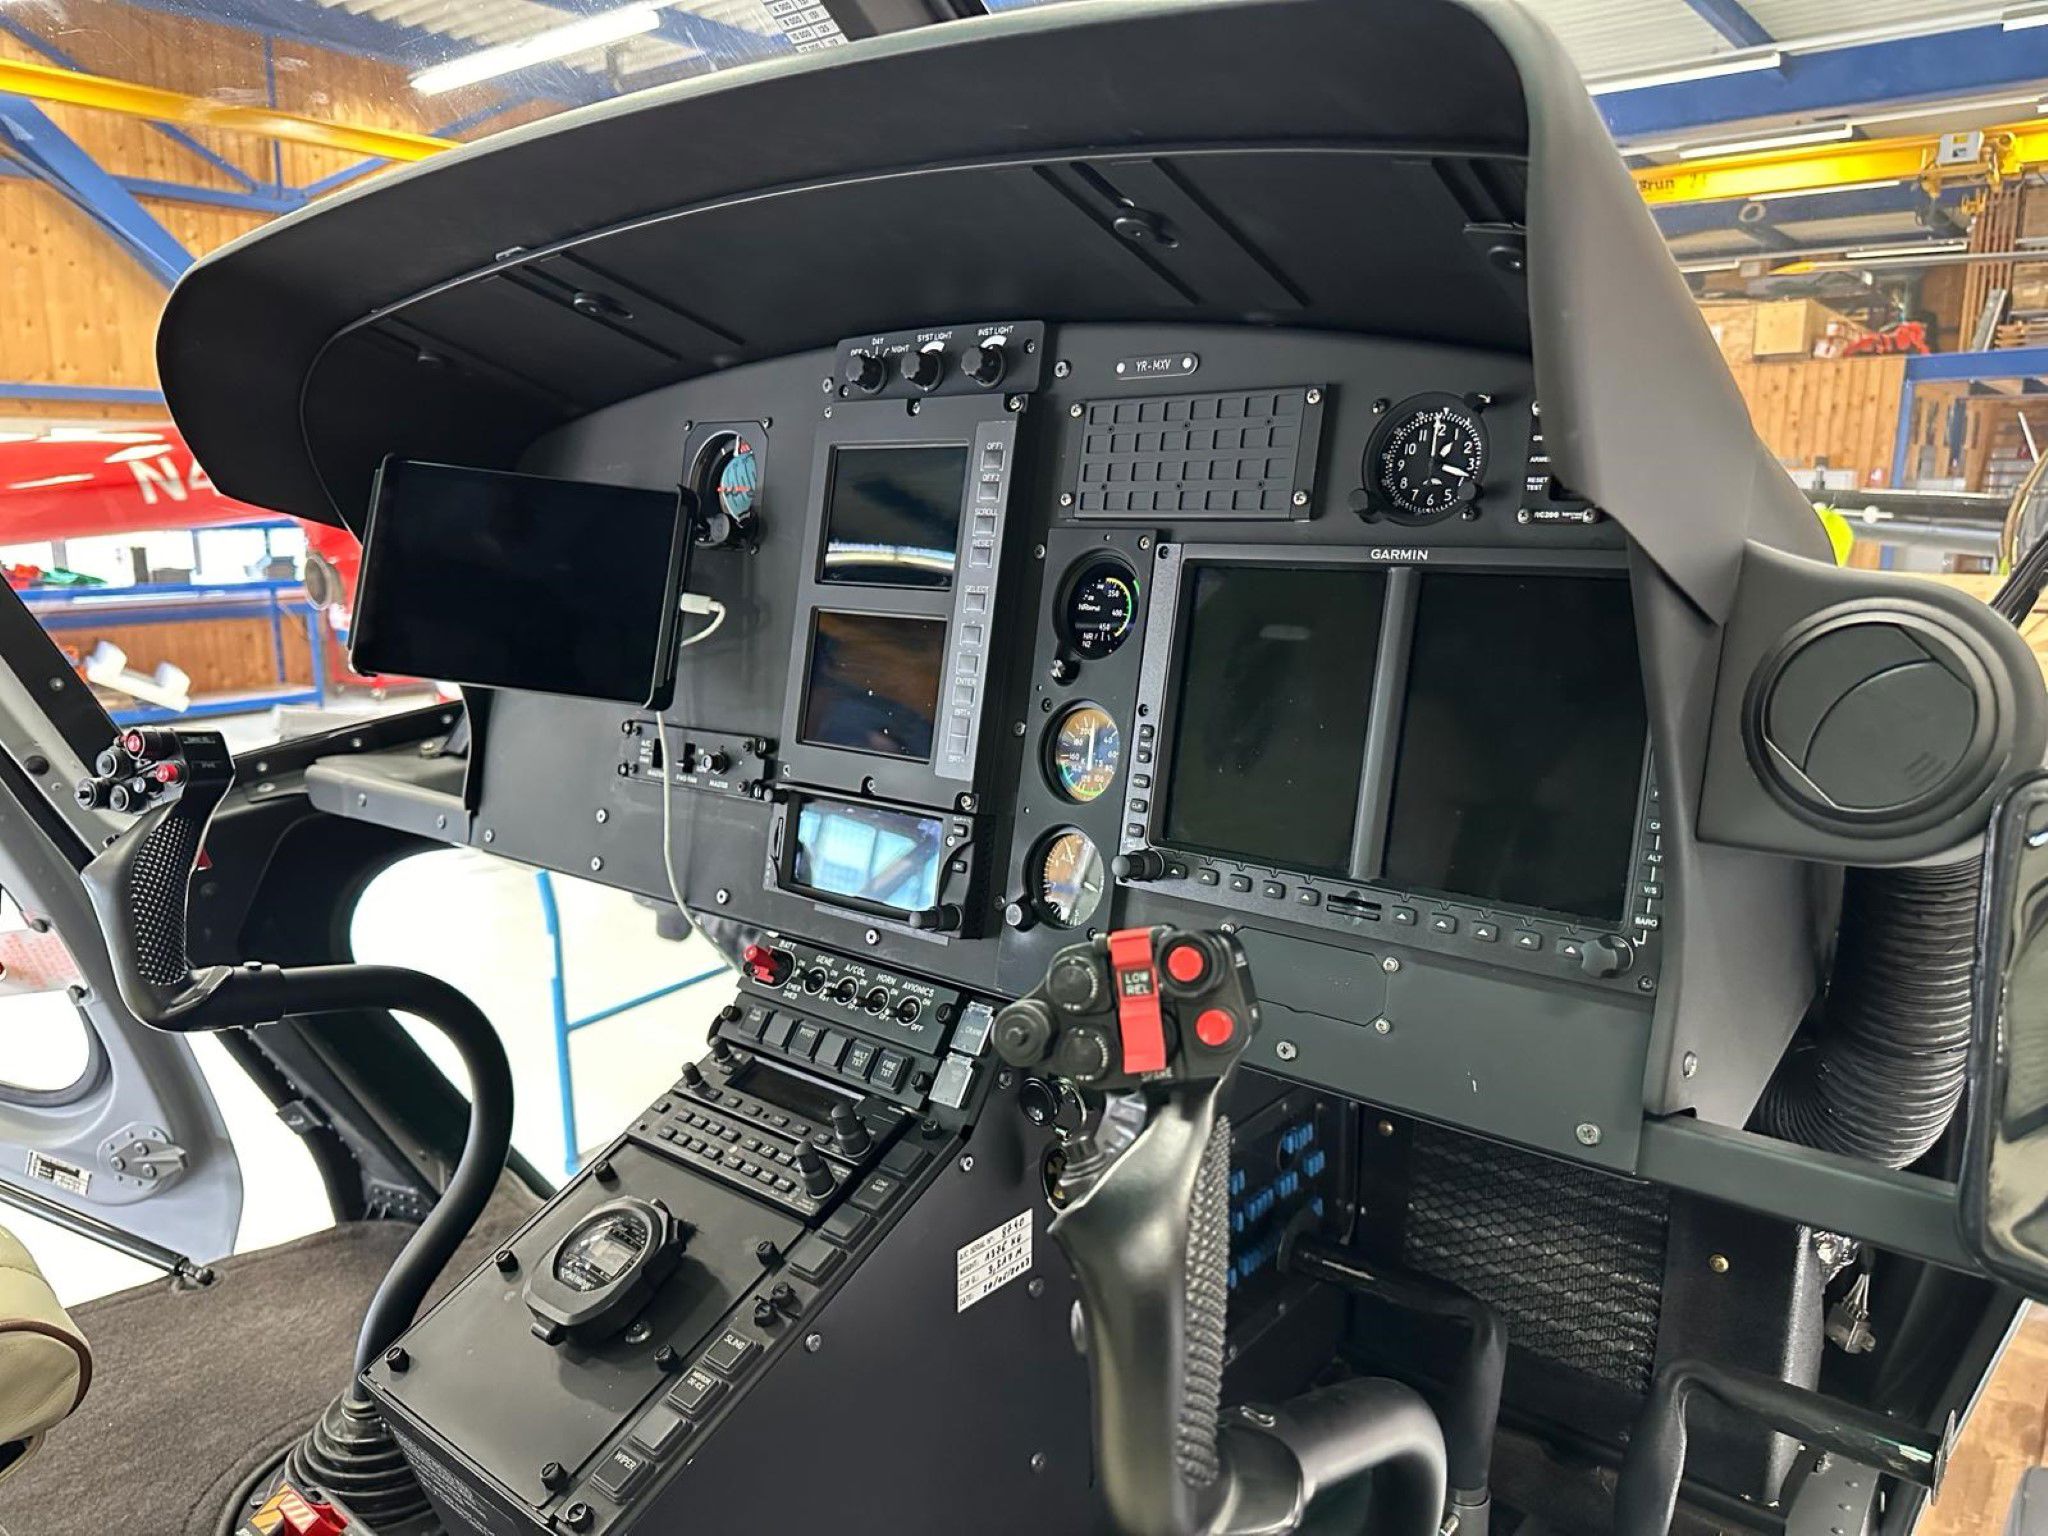 2020 Airbus Helicopters H125 Ecureuil - Interior